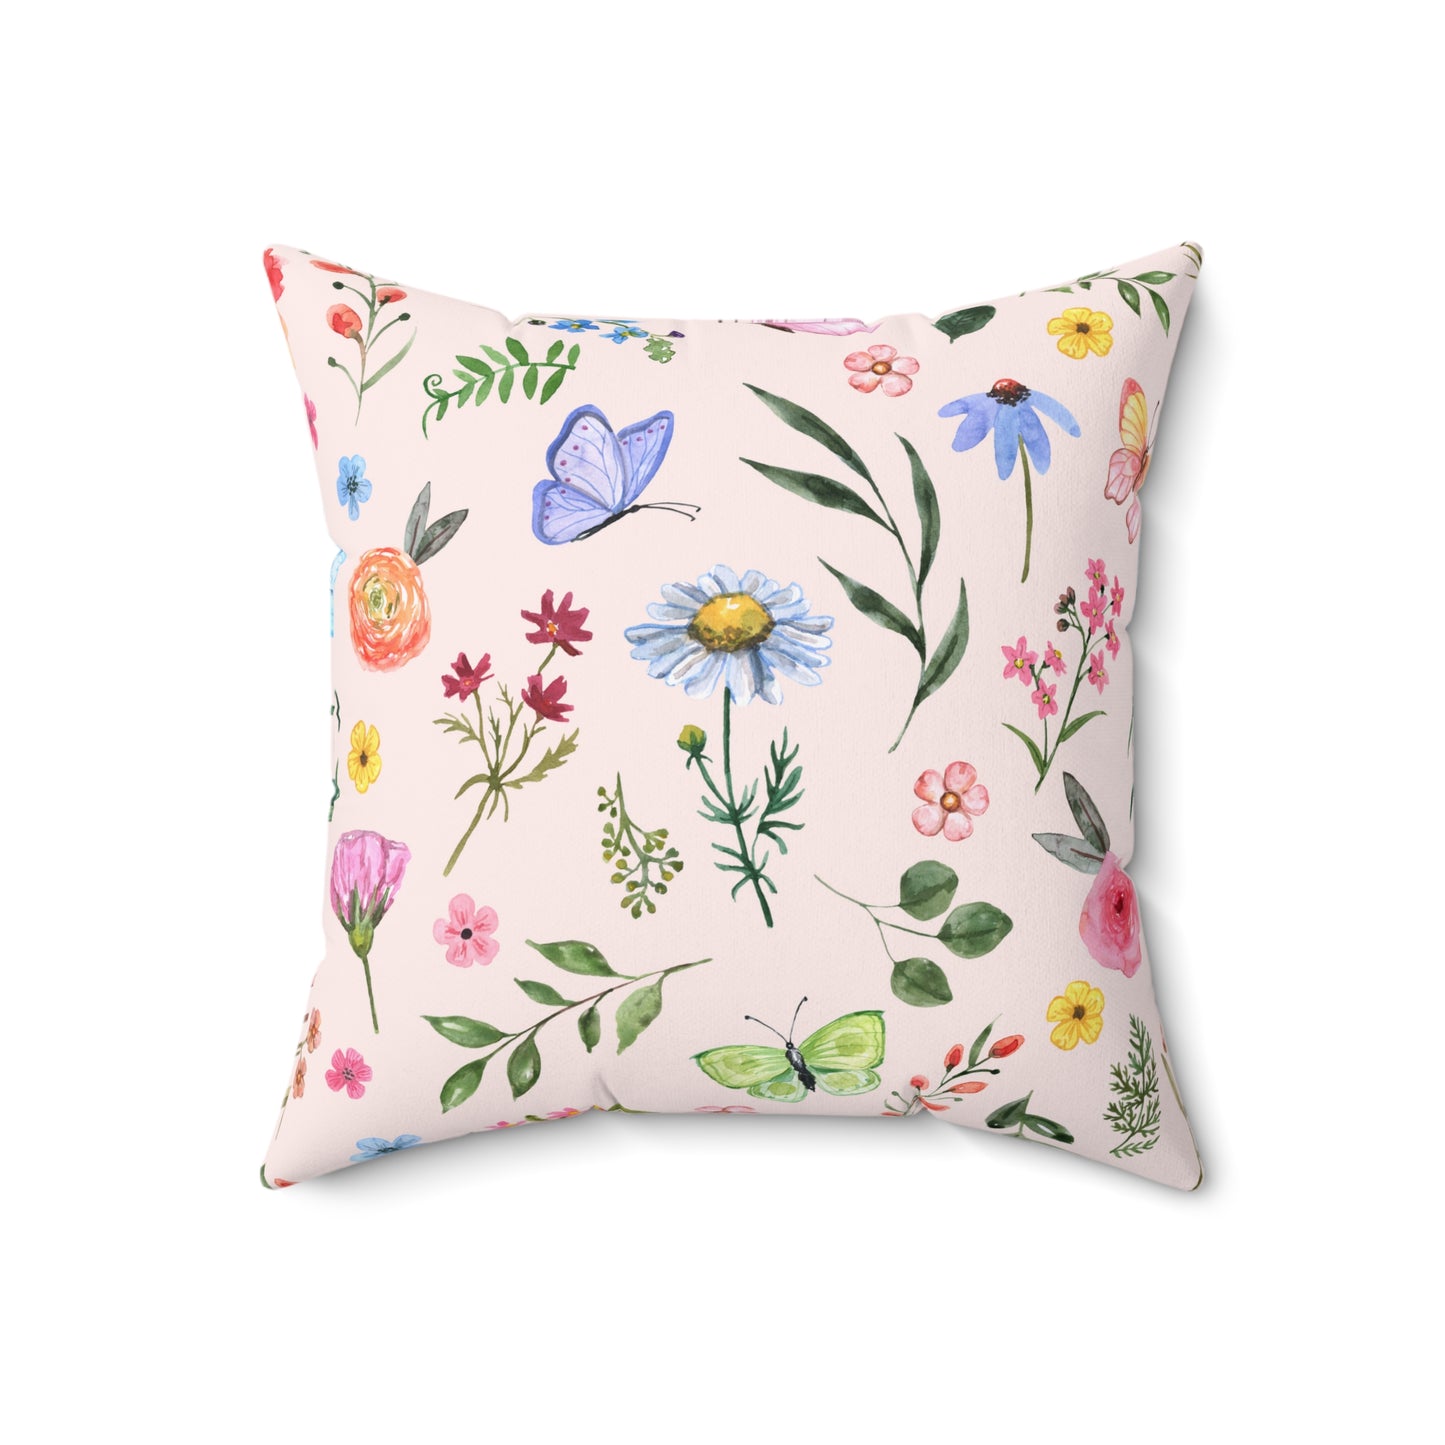 Spring Daisies and Butterflies Spun Polyester Square Pillow